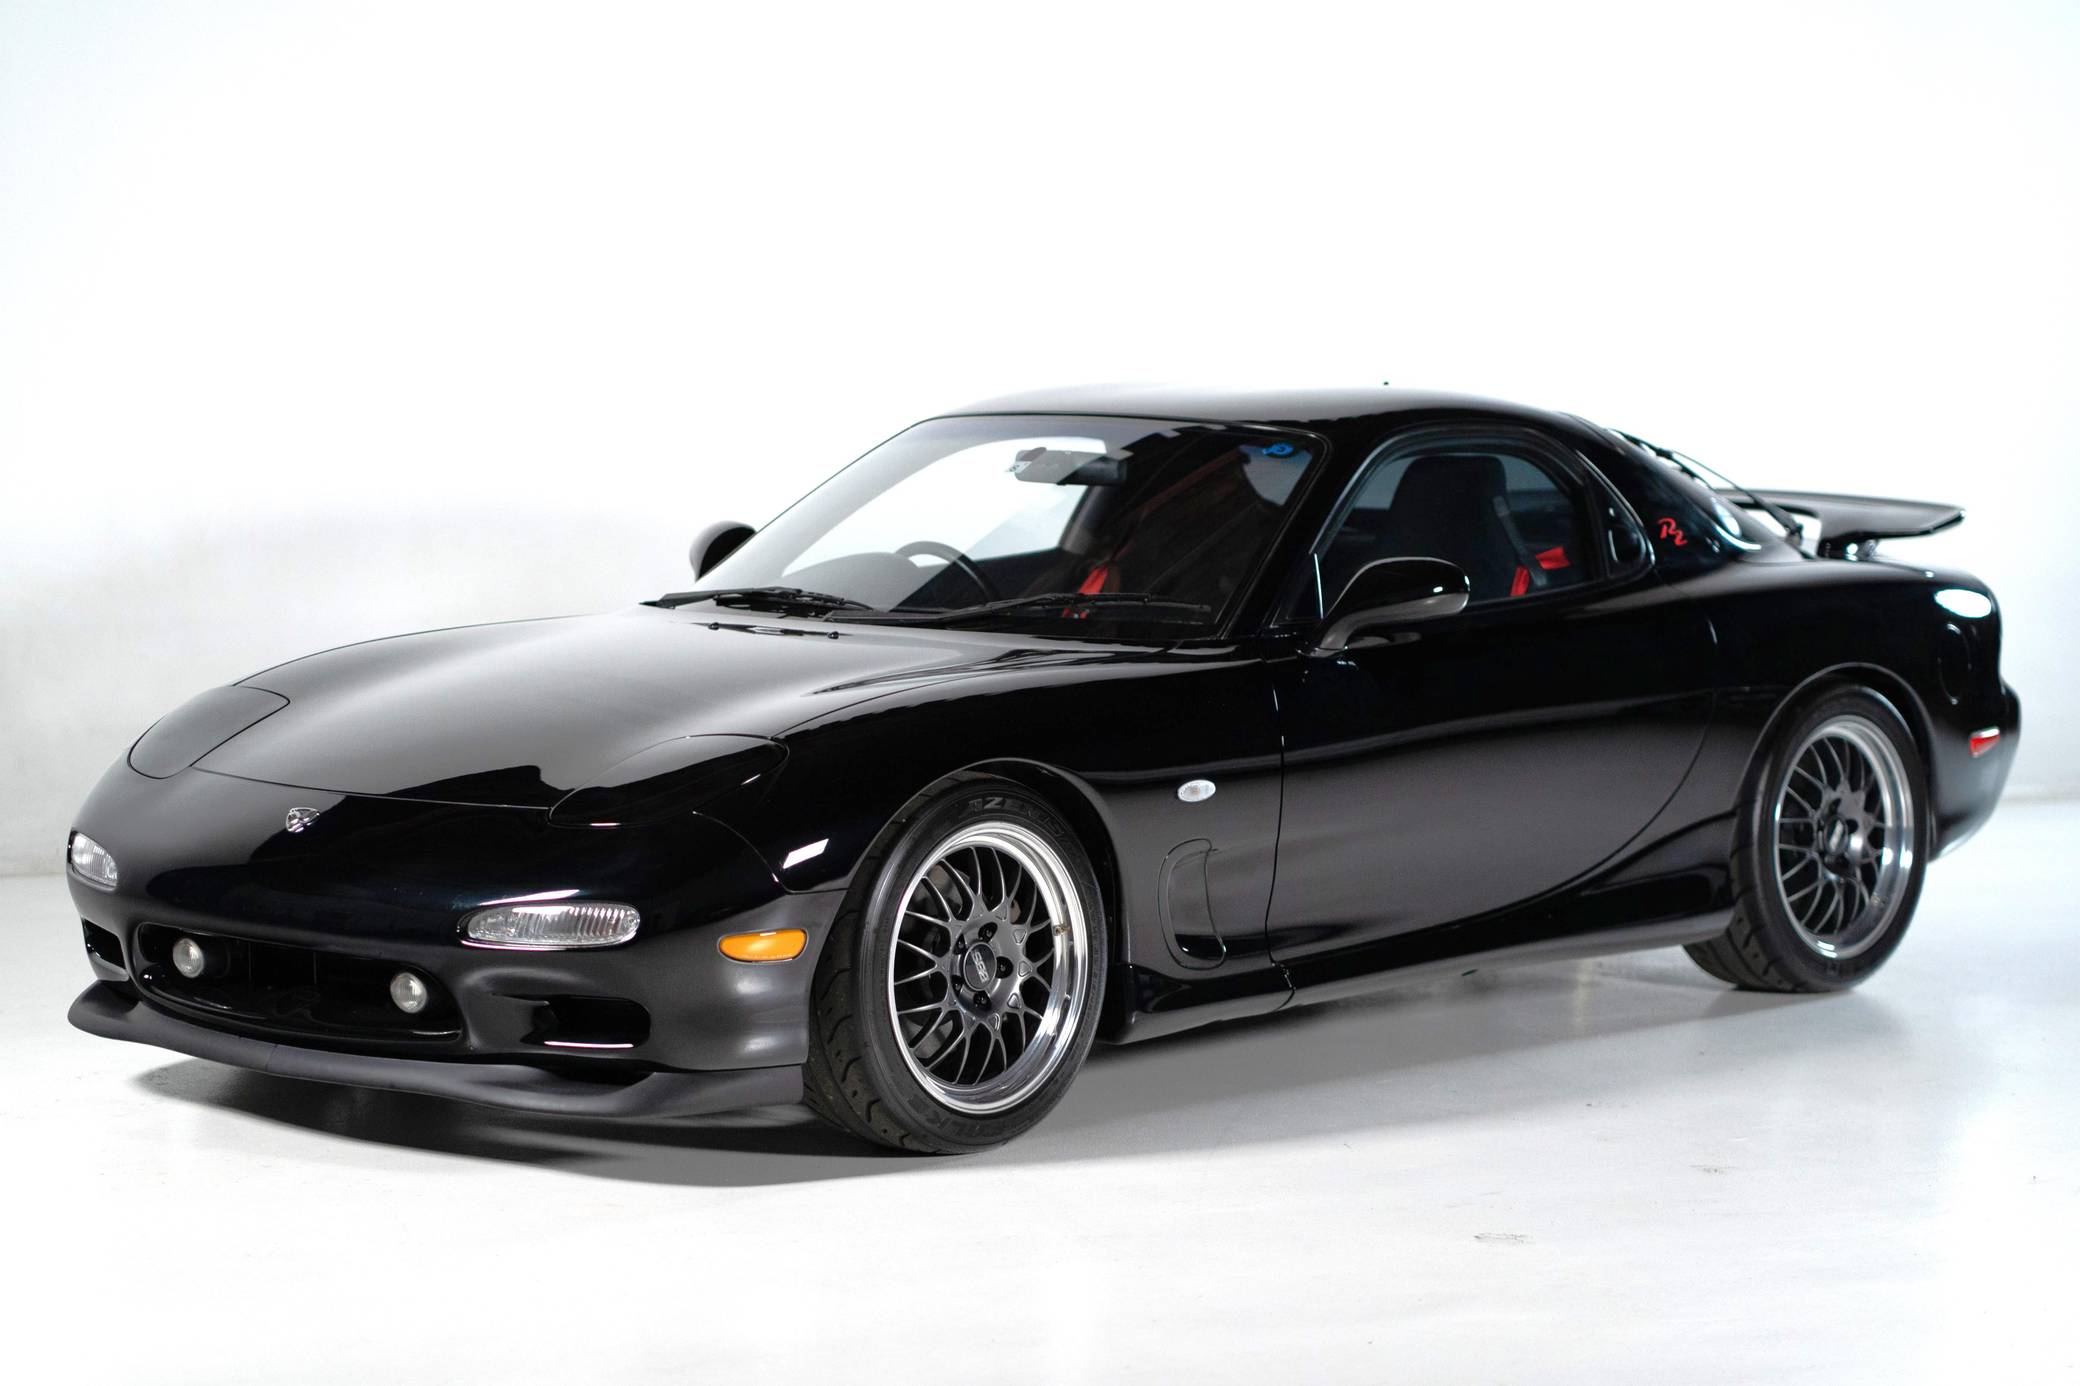 Mazda RX-7 Returns To Production, But Only Parts of It